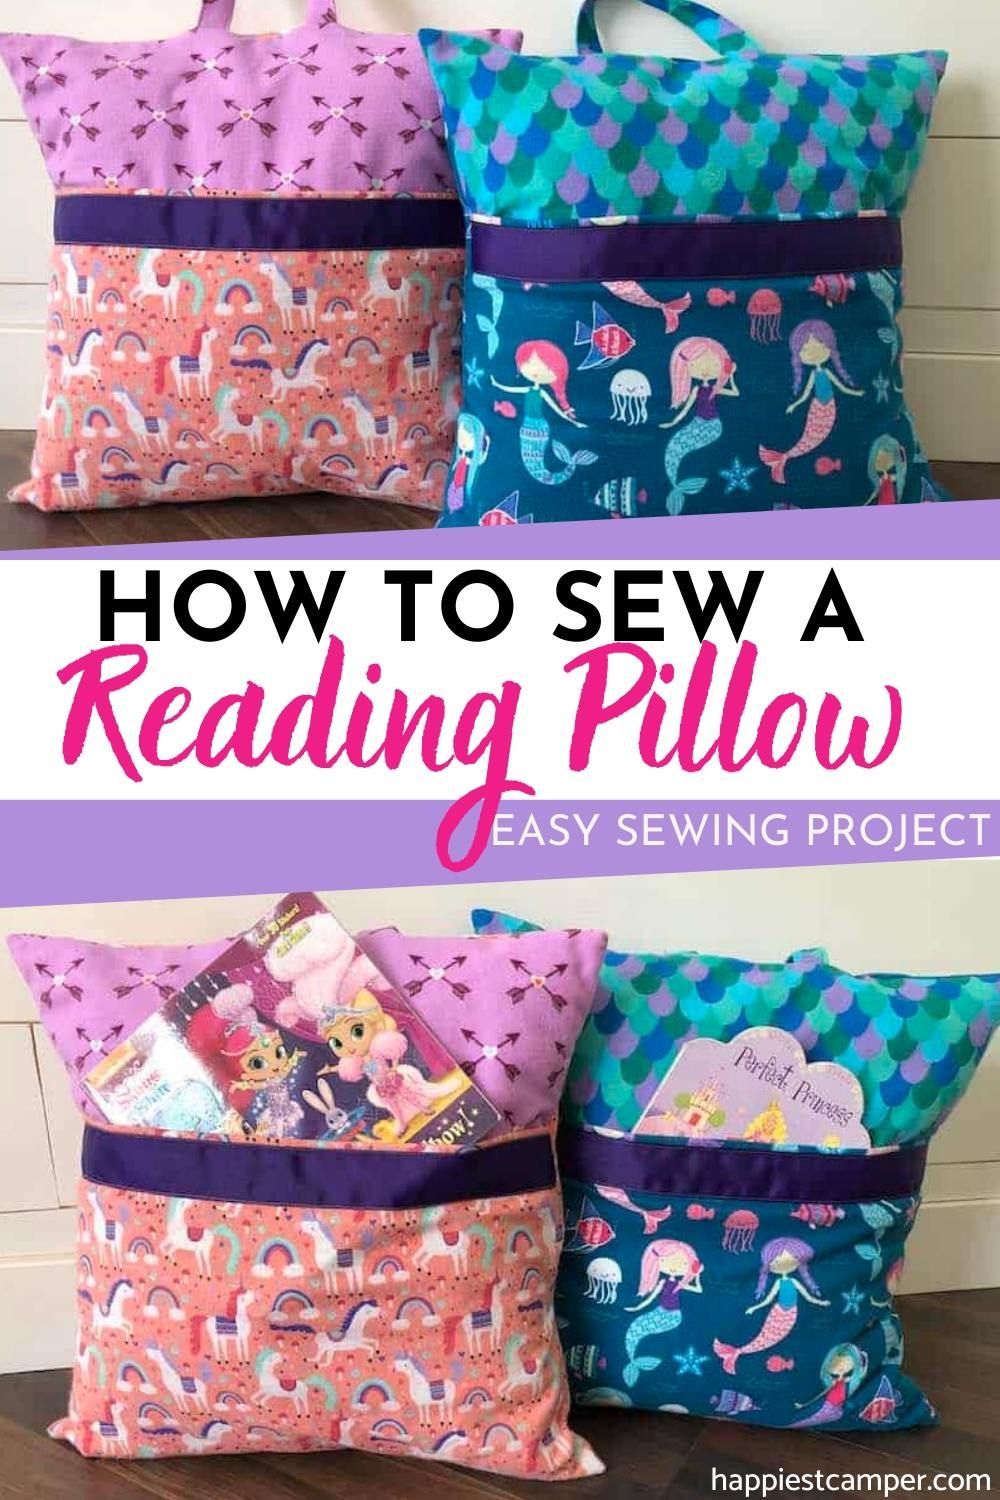 How To Sew A Reading Pillow -   diy Easy sewing